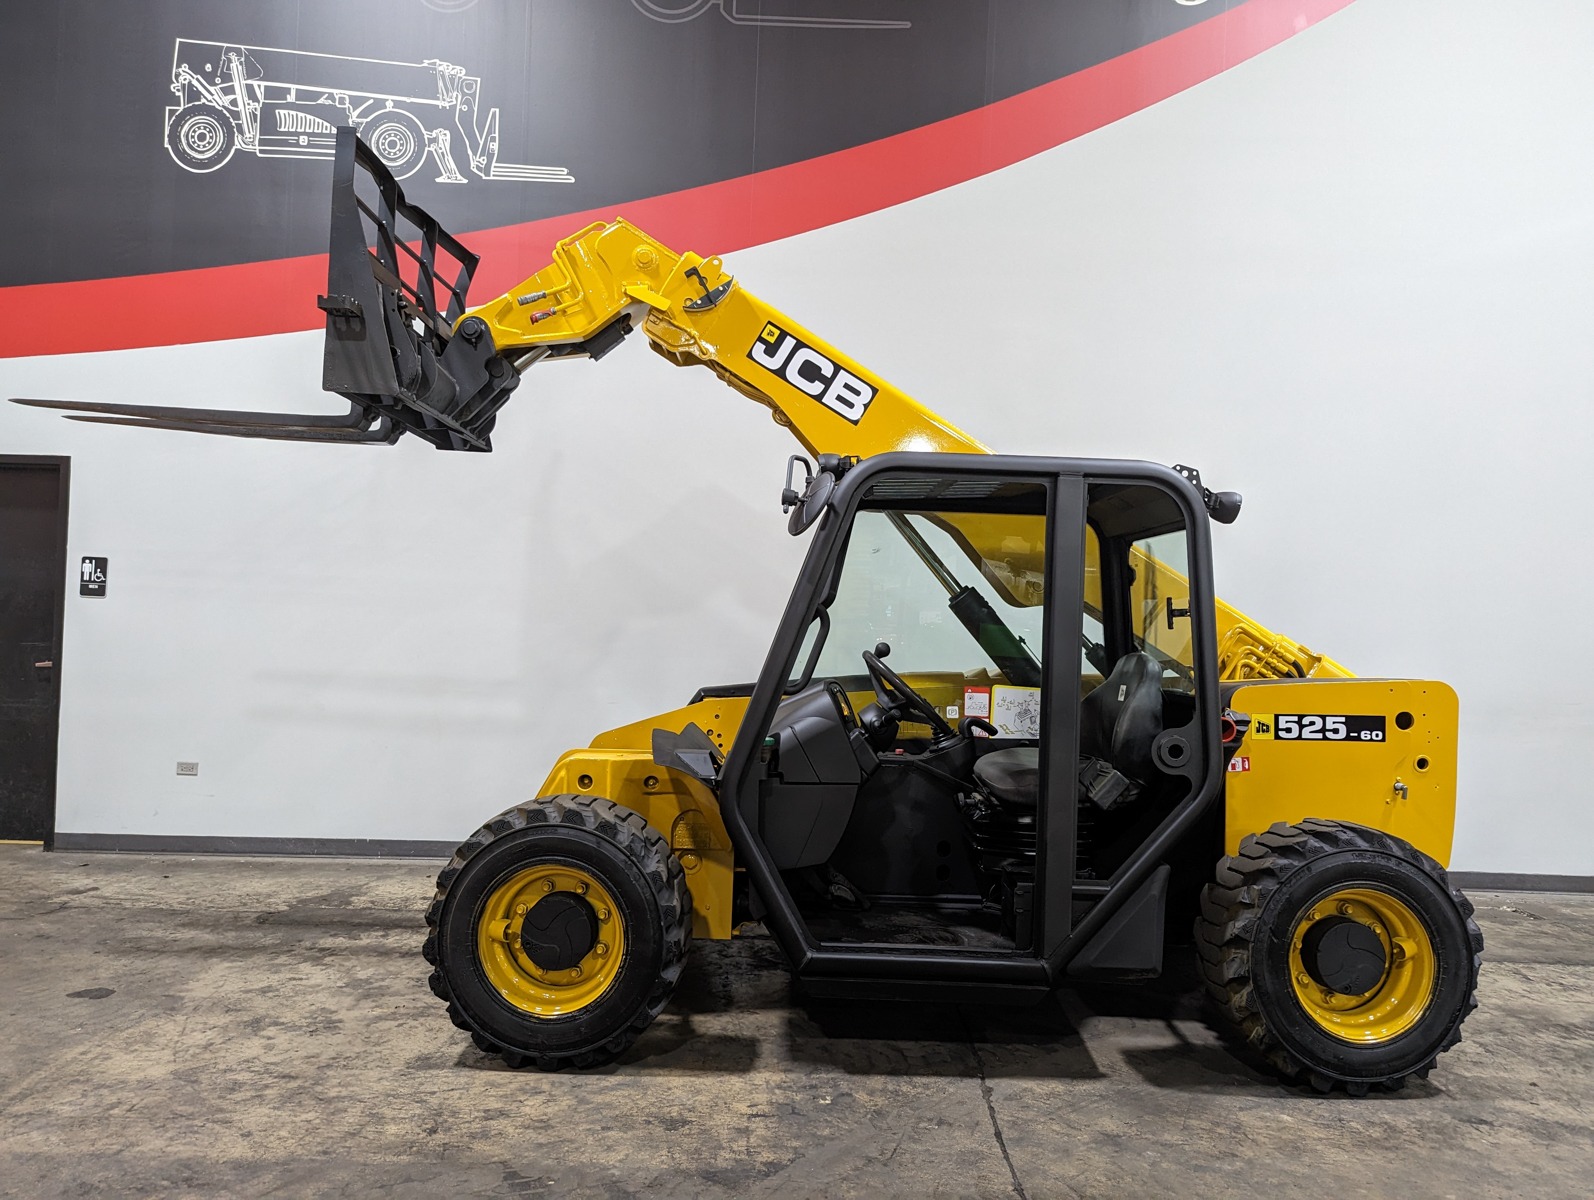 Used 2015 JCB 525-60  | Cary, IL